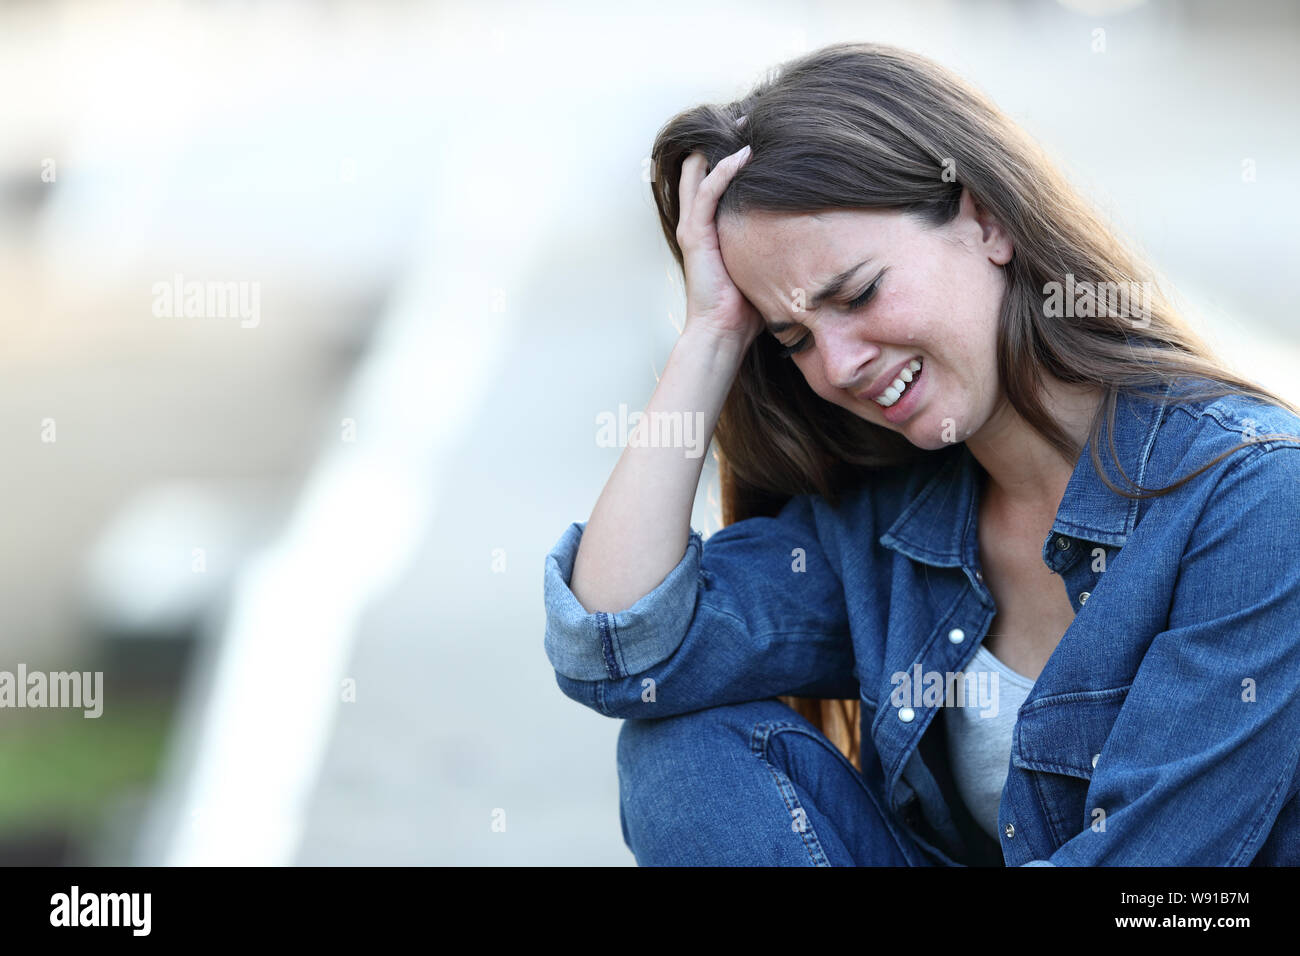 Sad woman crying and complaining in the street Stock Photo